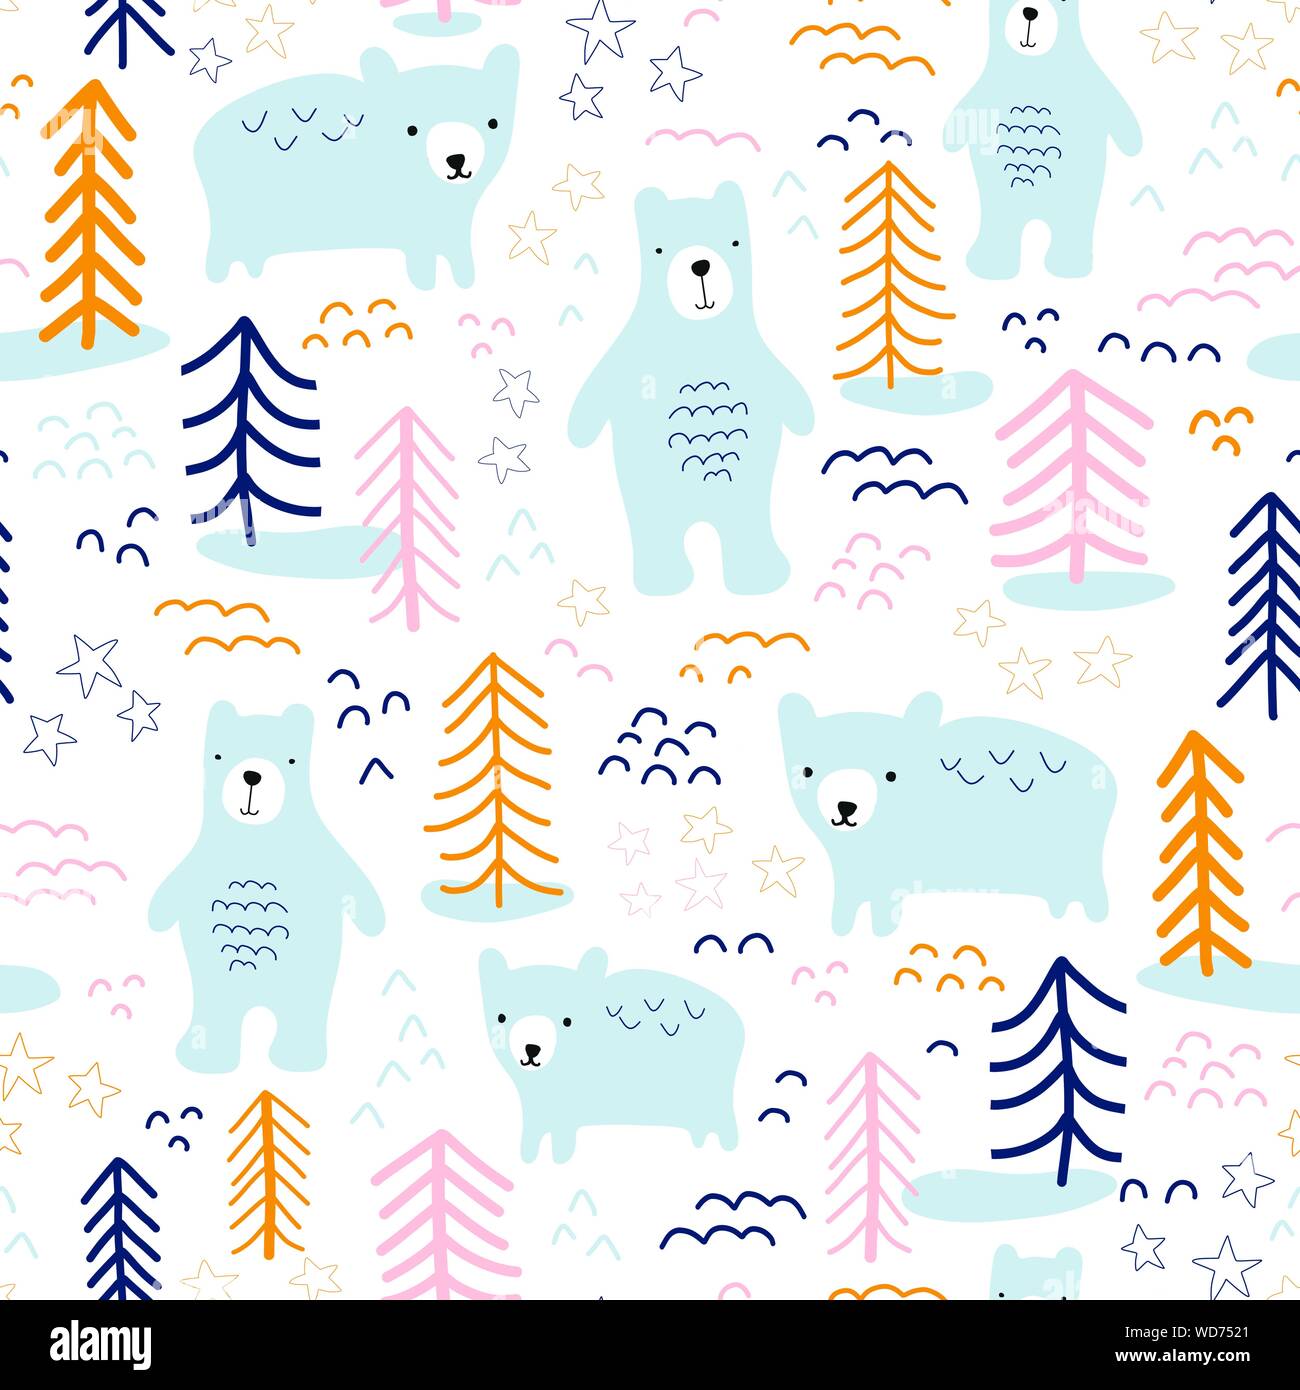 Seamless pattern bears in forest hand drawn vector illustration. Scandinavian style repeating animal nature background in blue, yellow, orange, pink Stock Vector